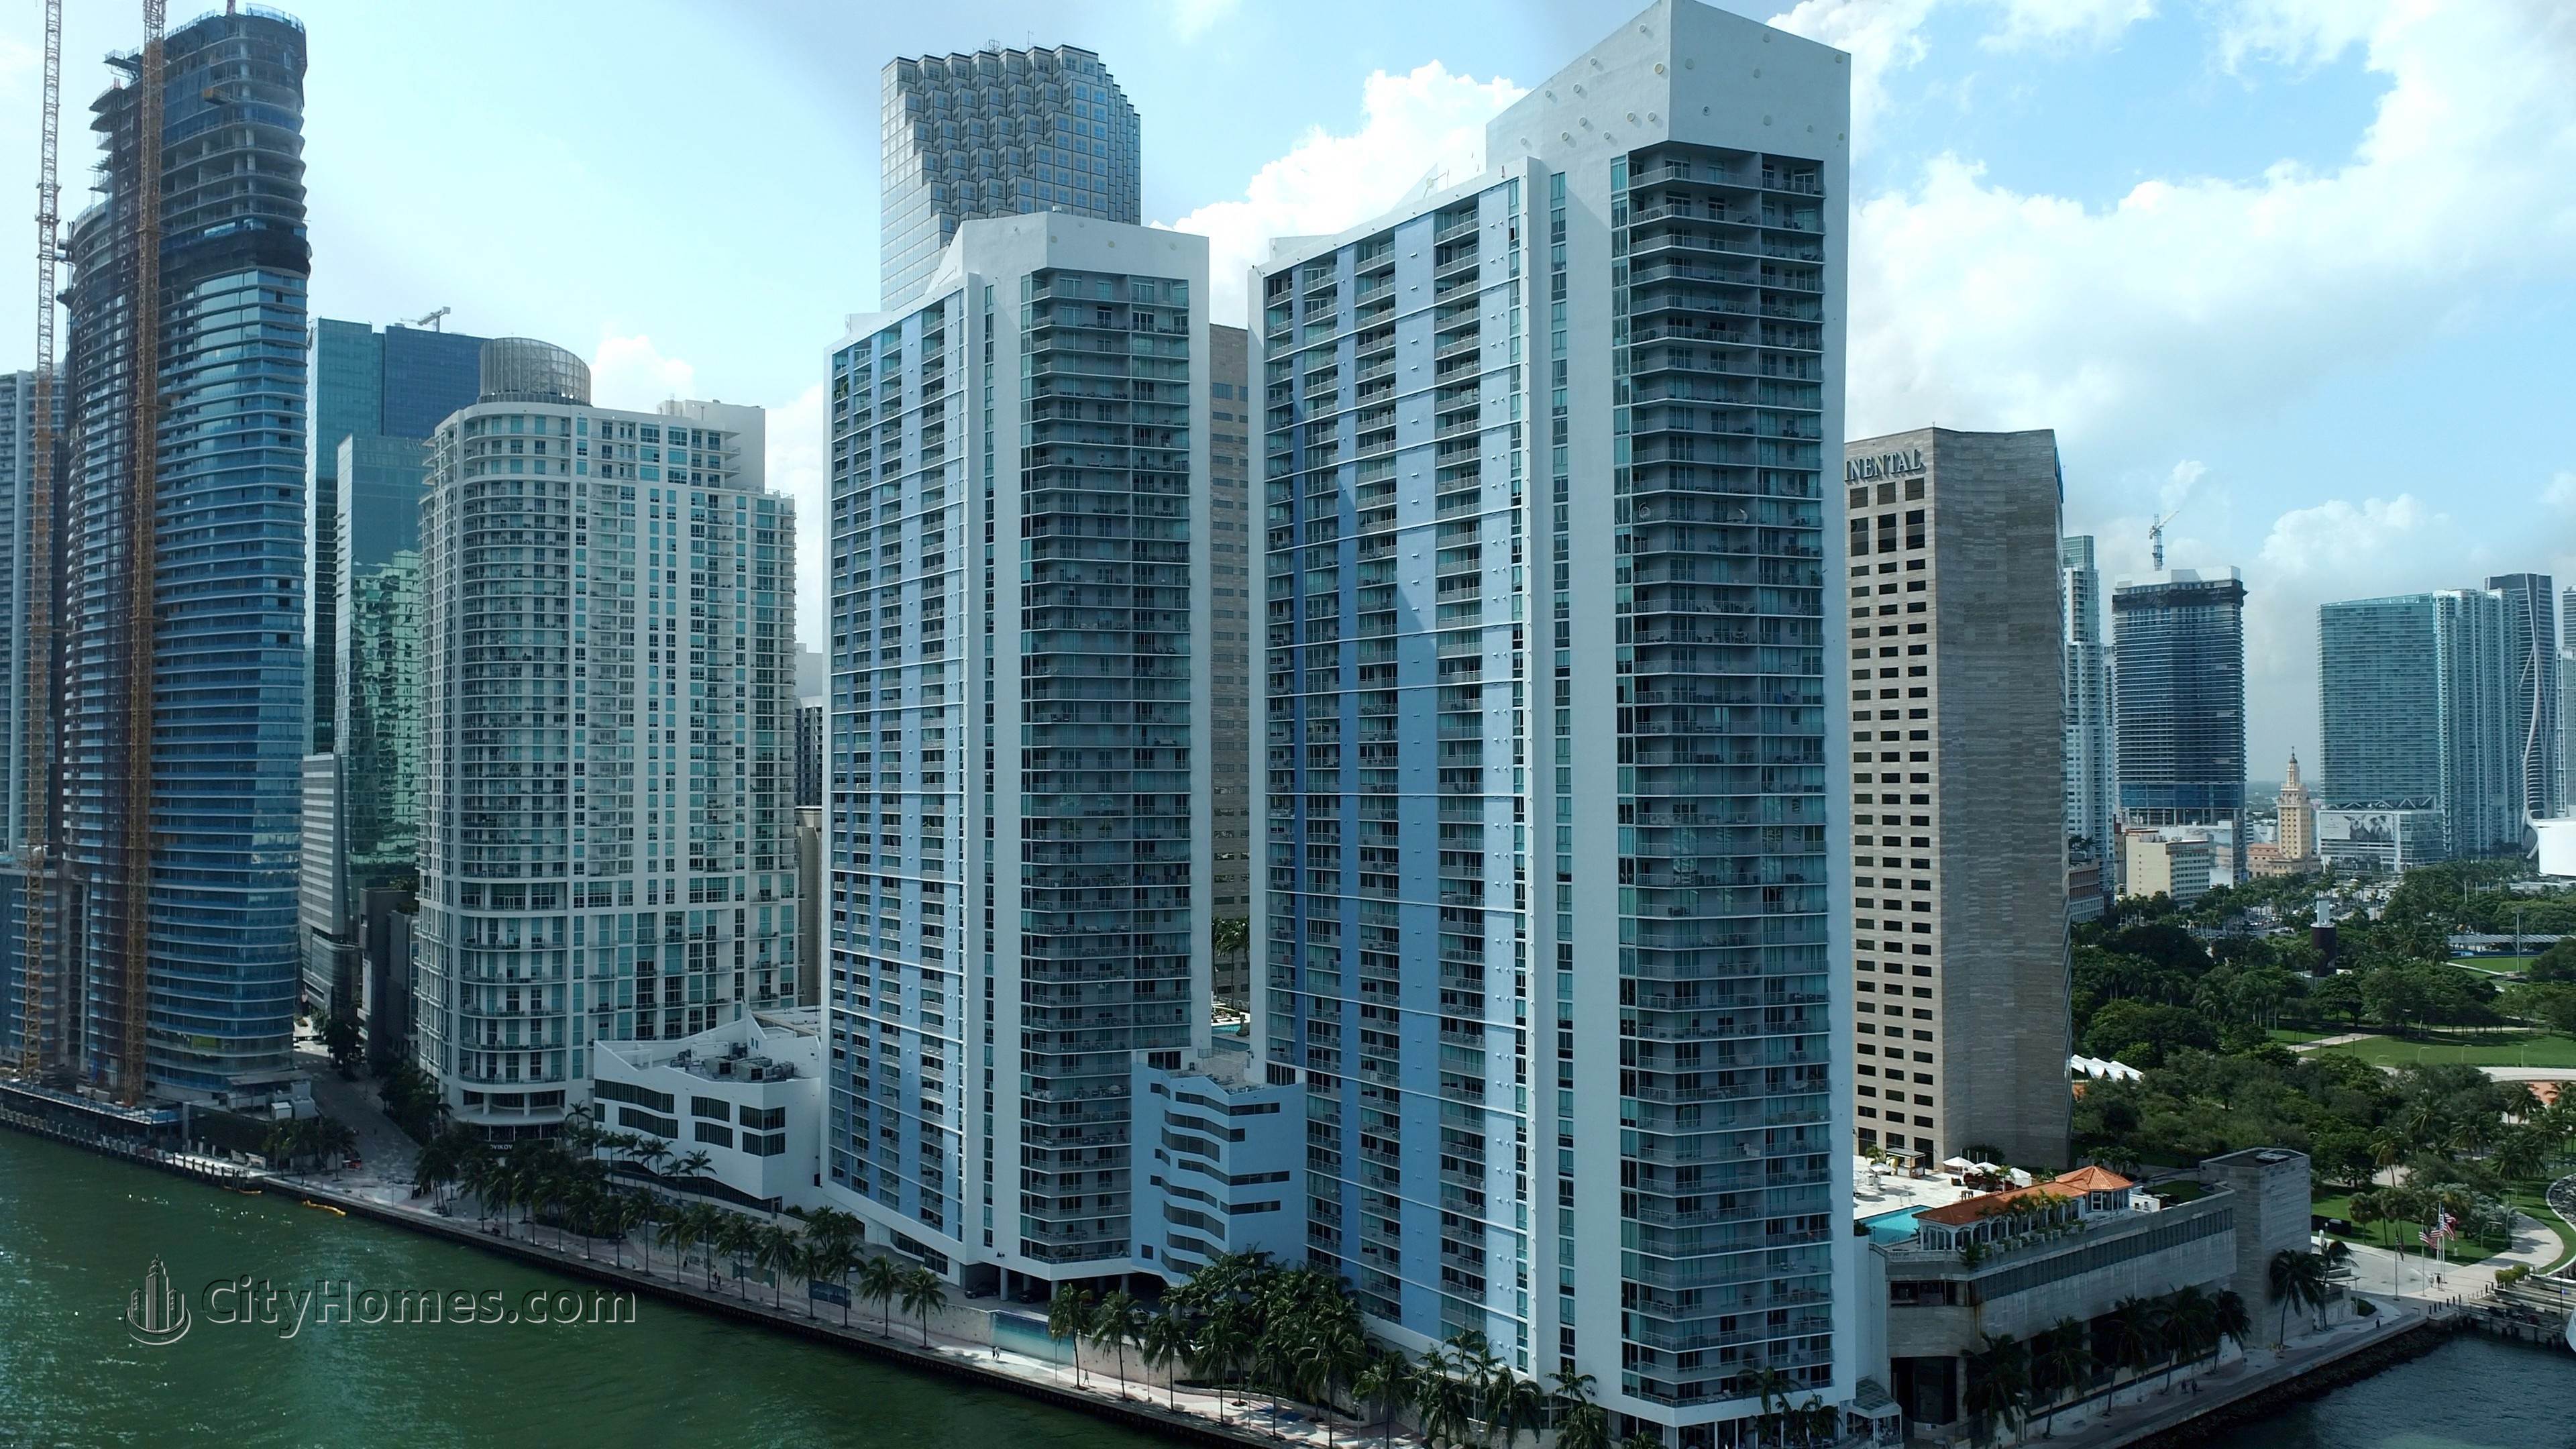 2. One Miami建於 325 And 335 S Biscayne Blvd, Miami, FL 33131